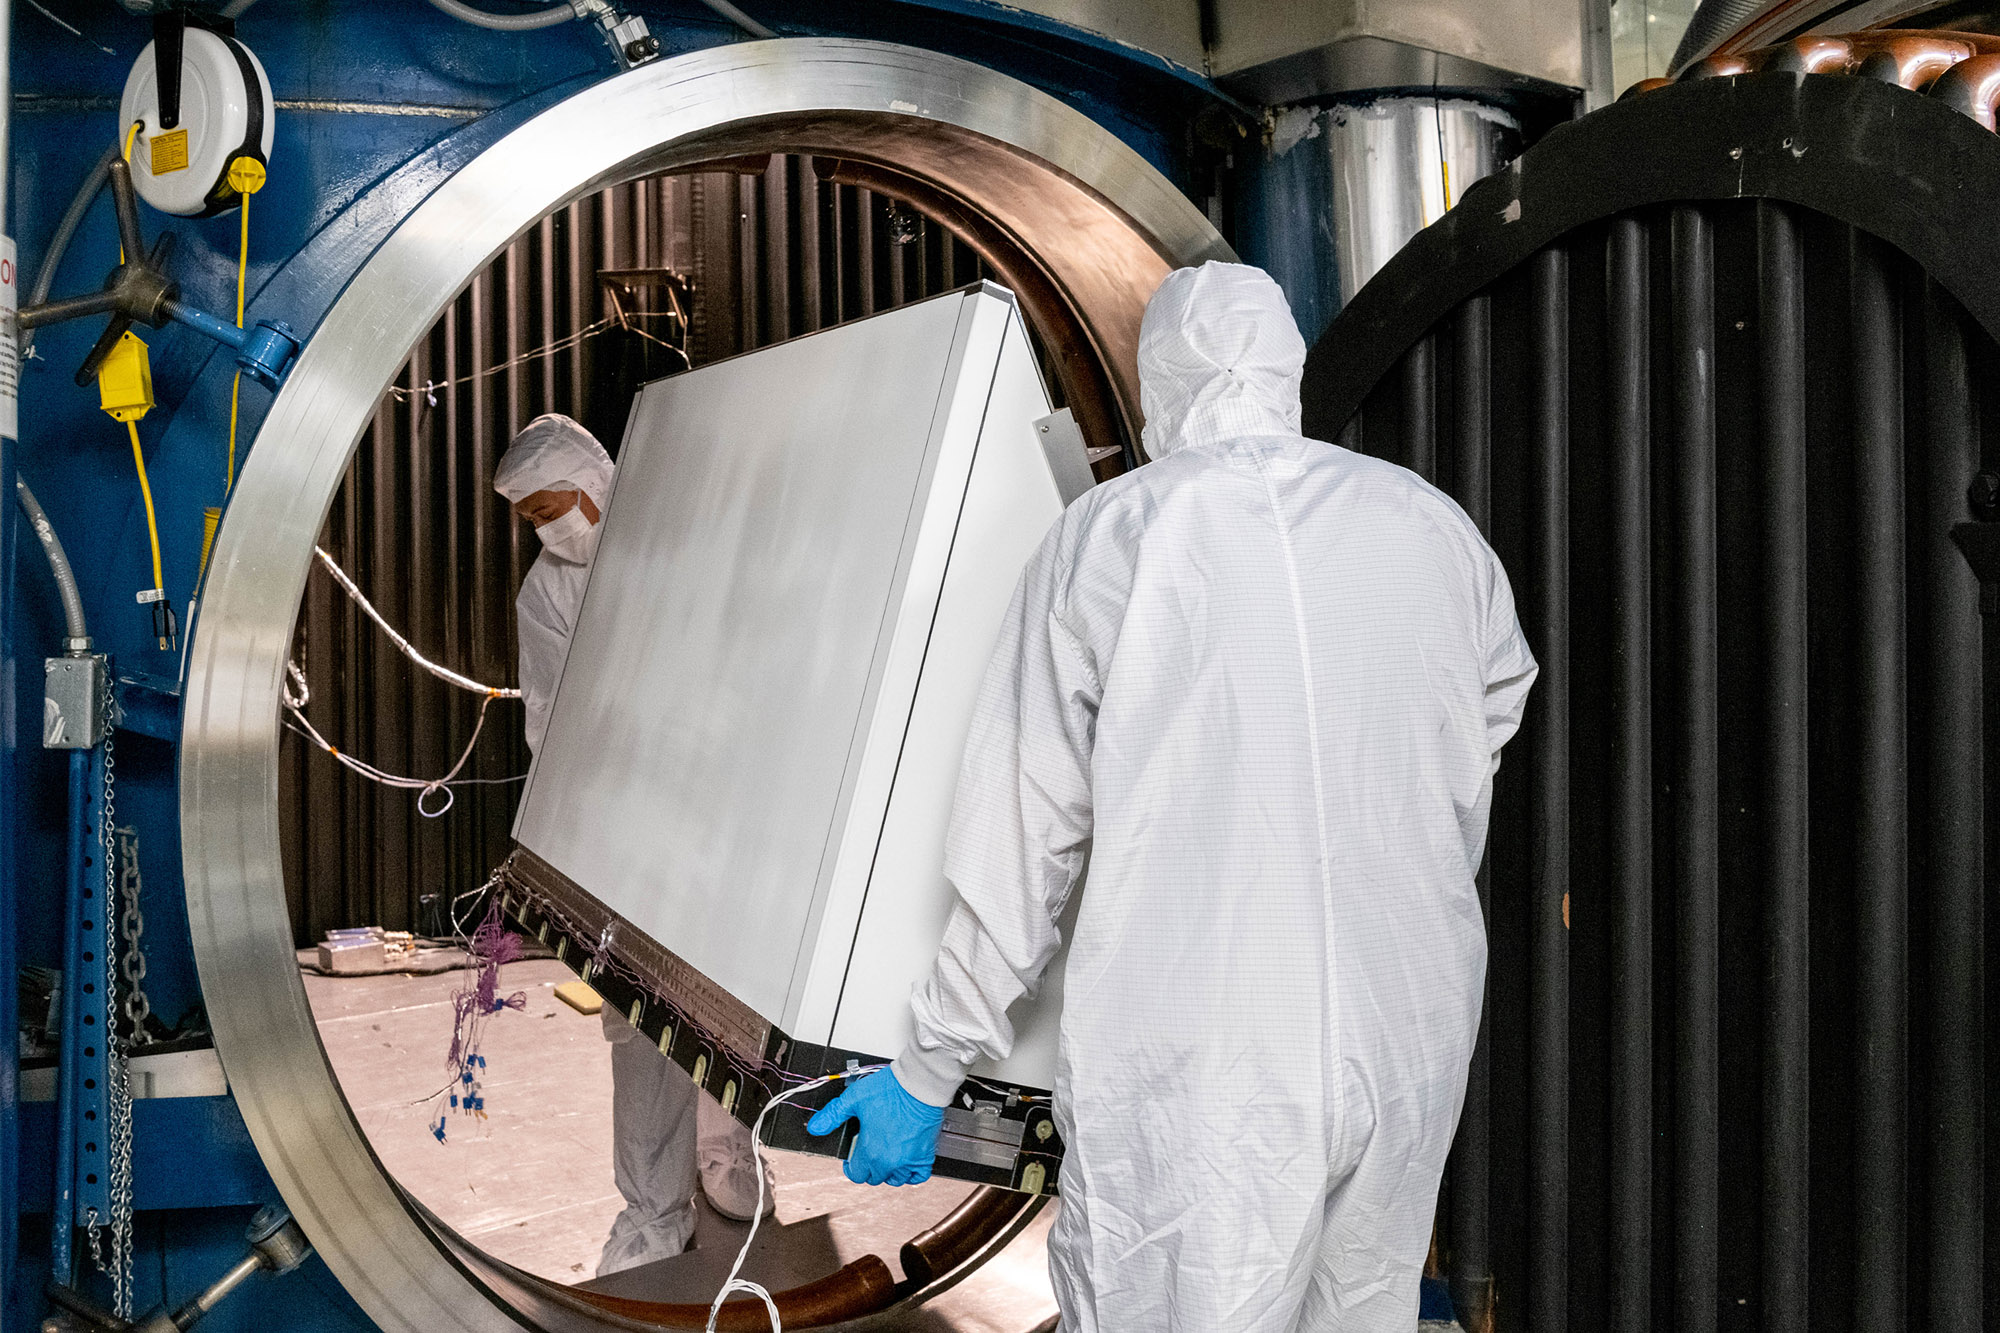 Mechanical Technicians Daniel Dizon and Joseph Eddy transport the Ocean Color Instrument Earth Shade into the thermal vacuum chamber.